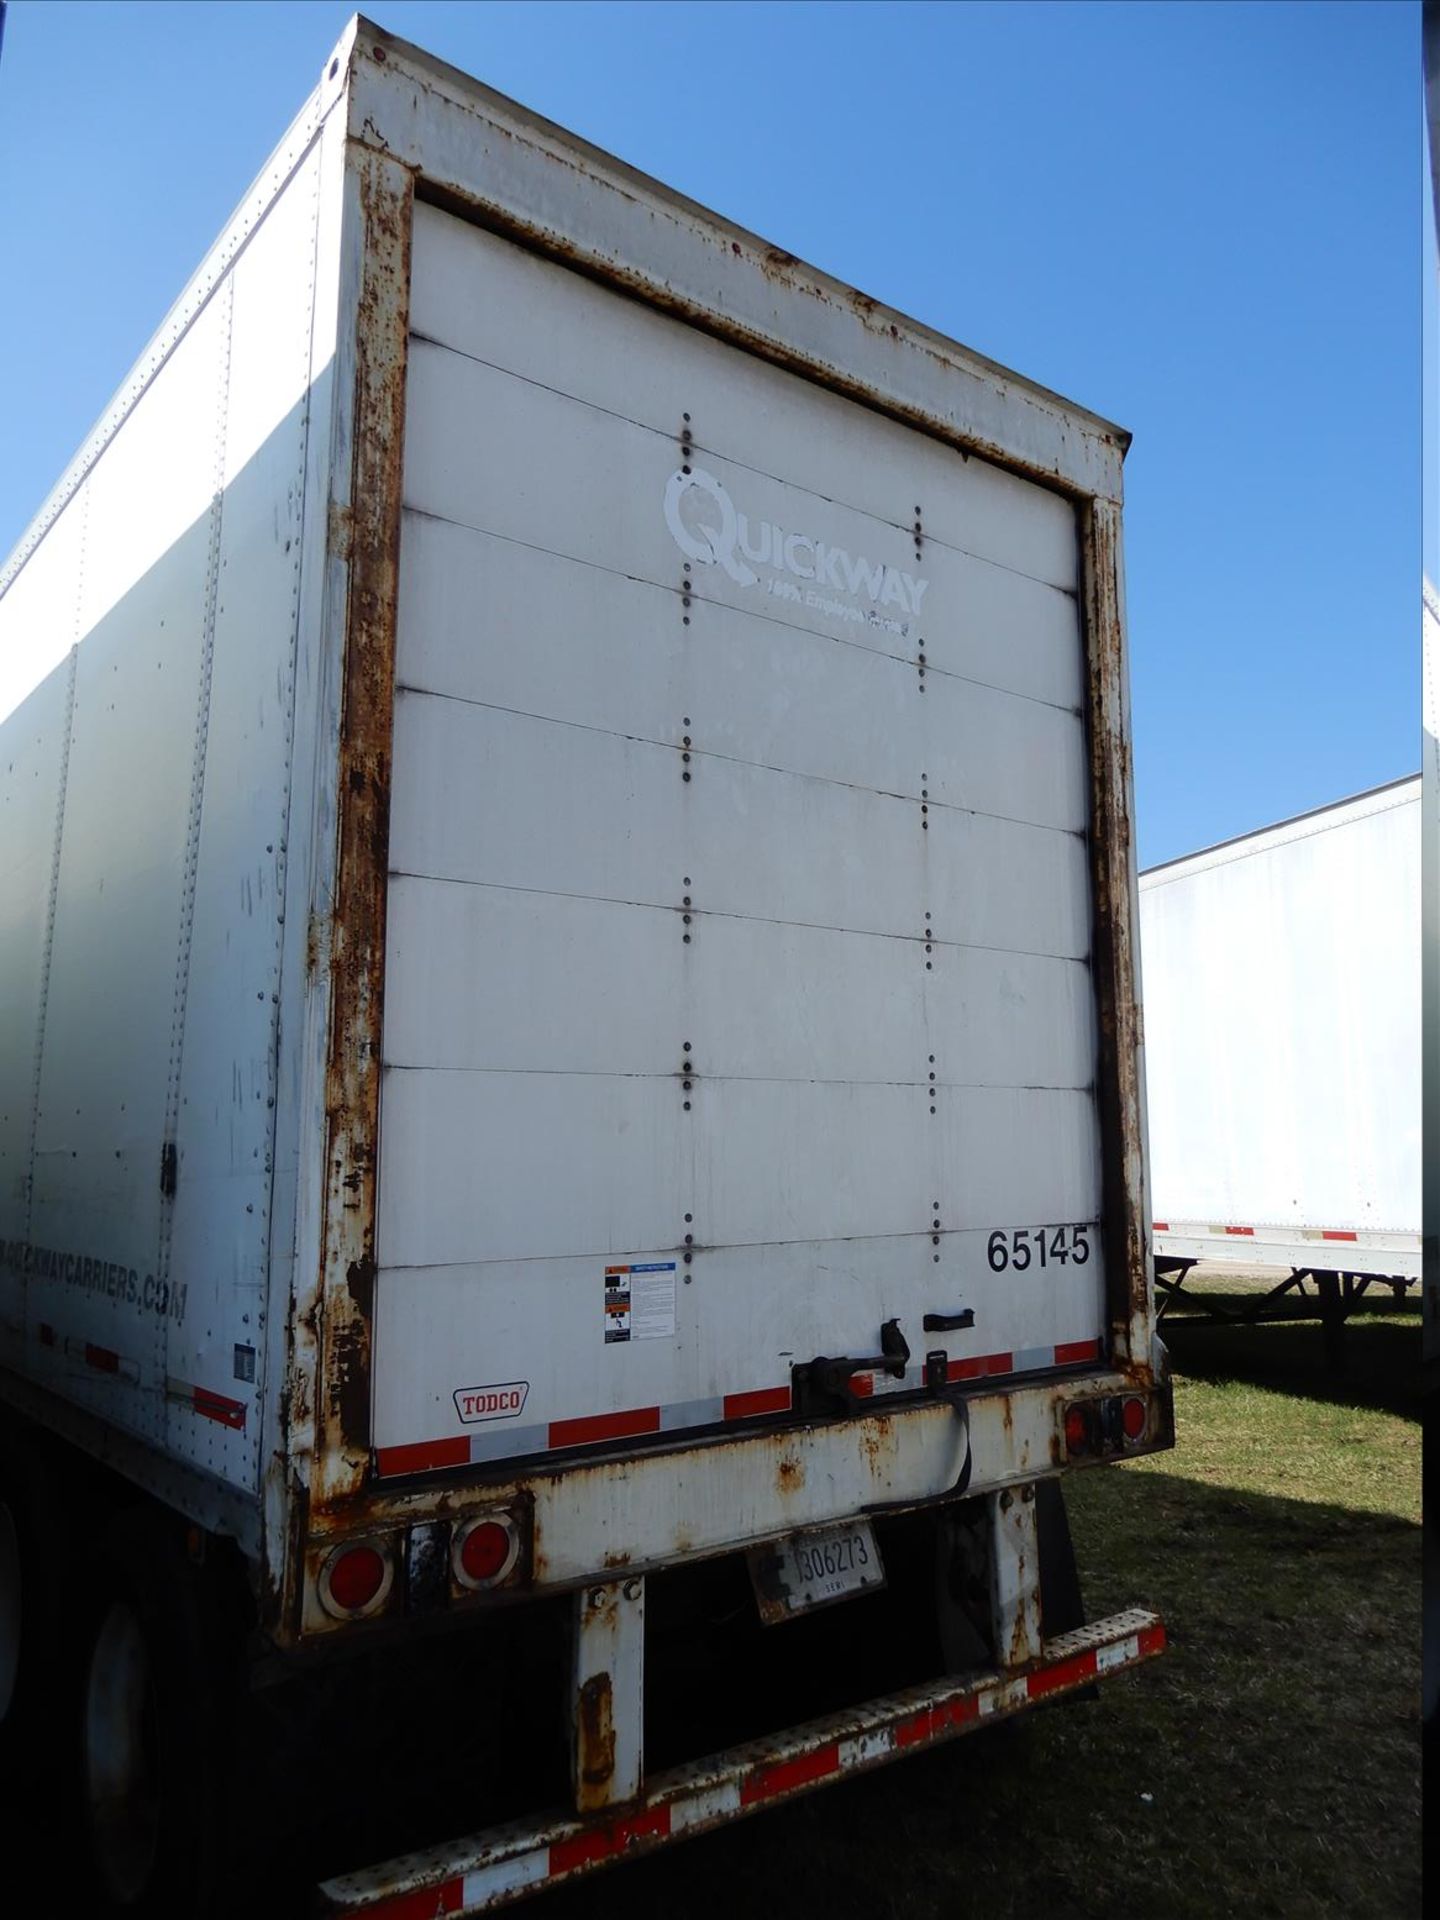 2006 Wabash Trailer - Located in Indianapolis, IN - Image 16 of 30